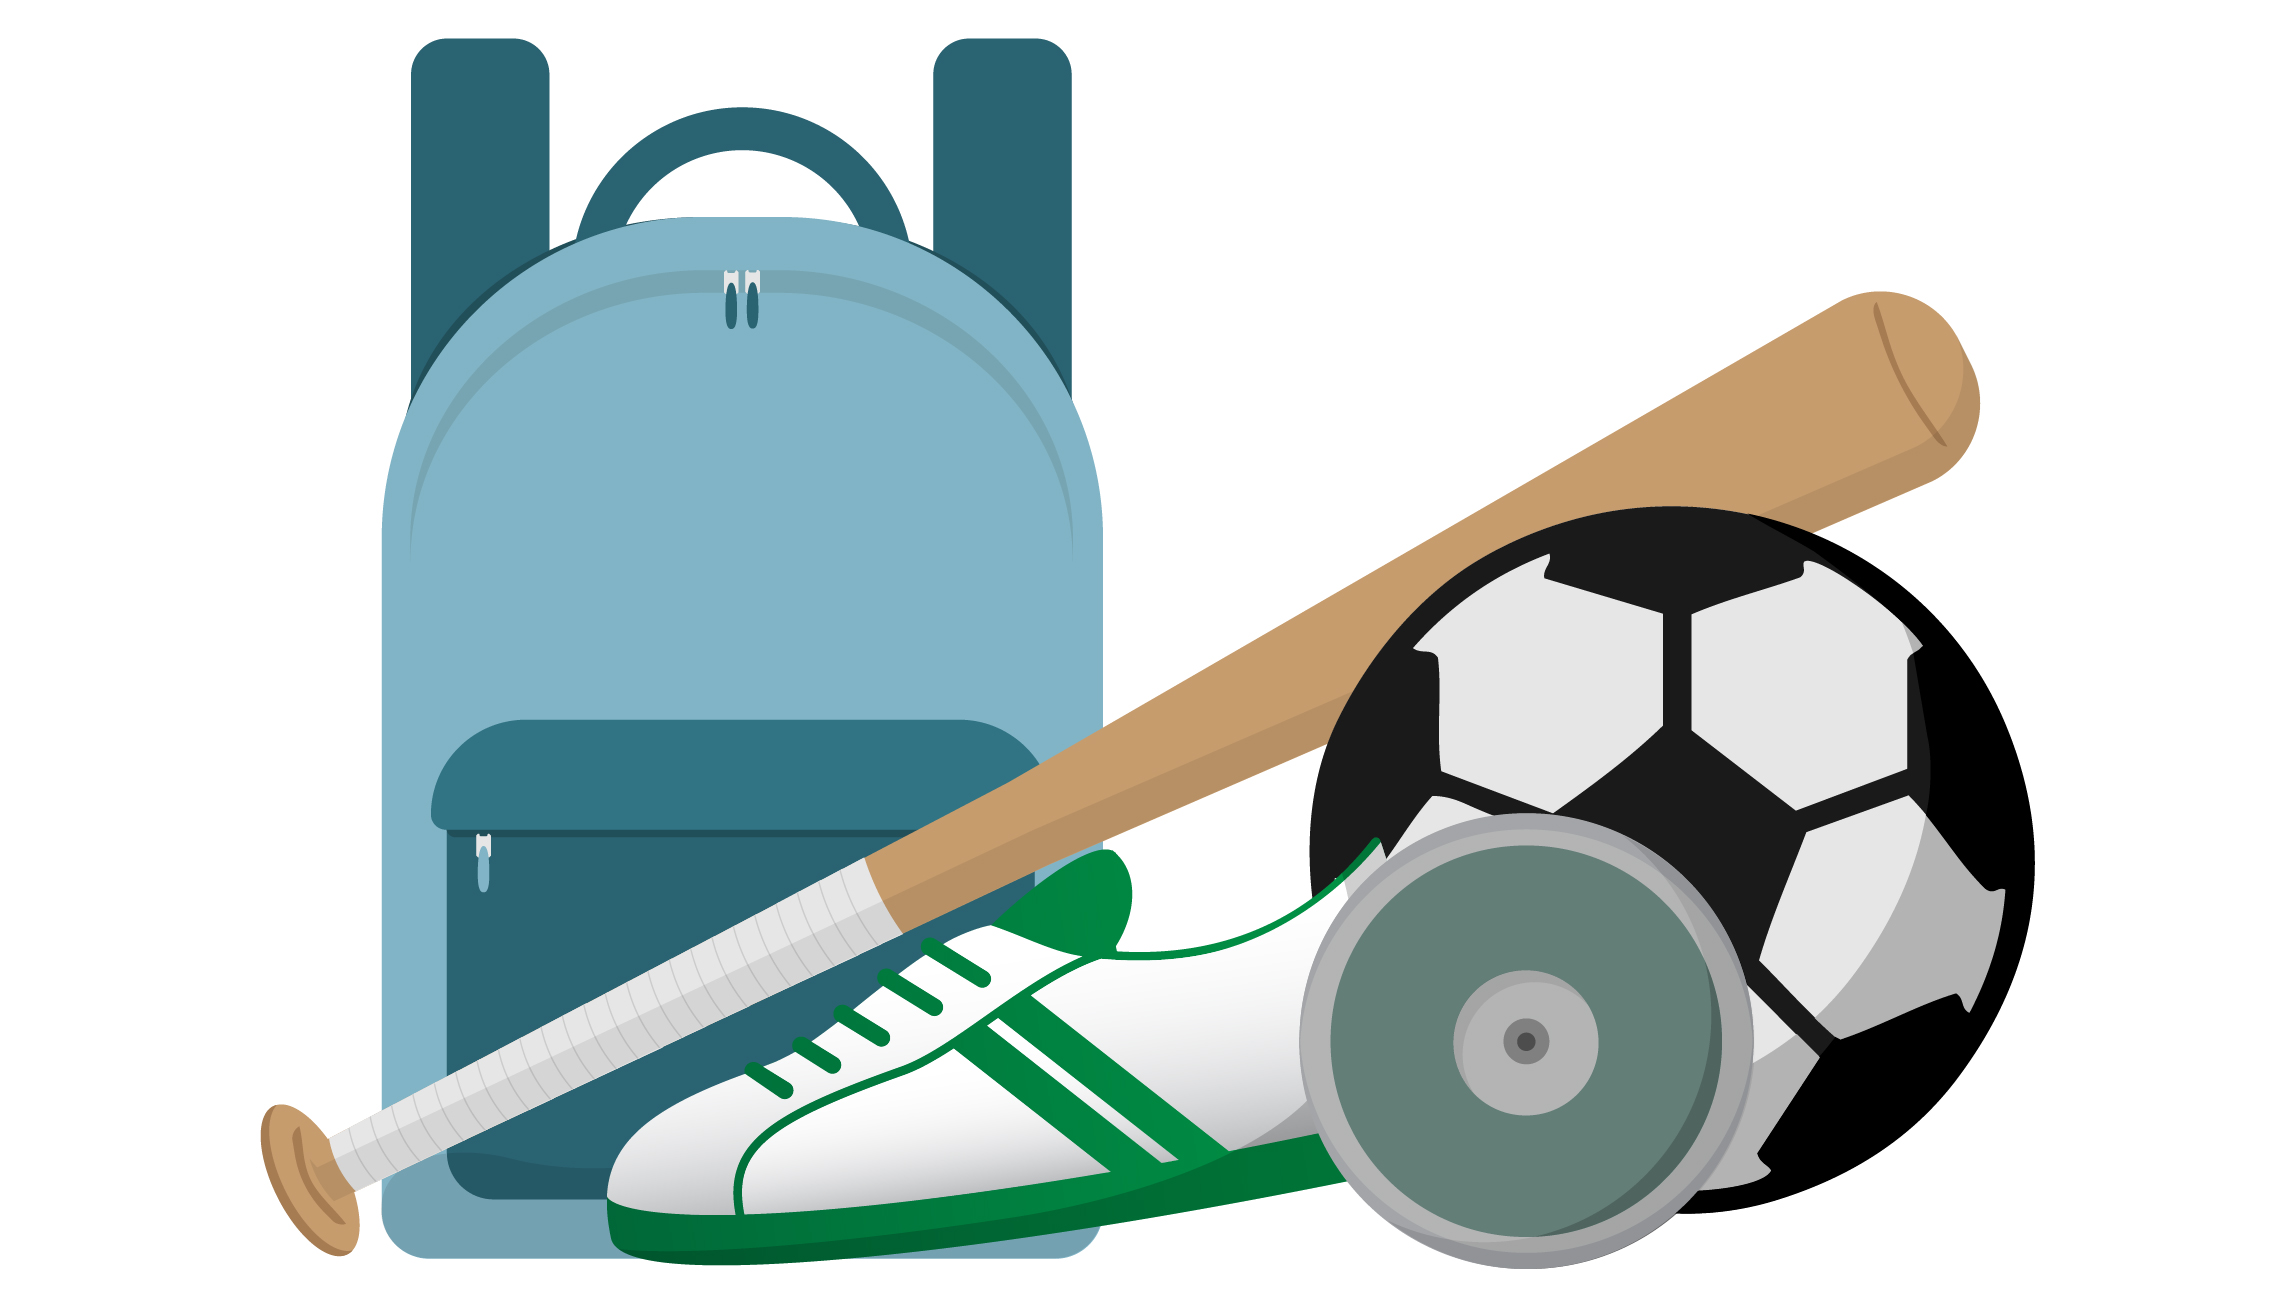 Sports equipment used after sports physicals